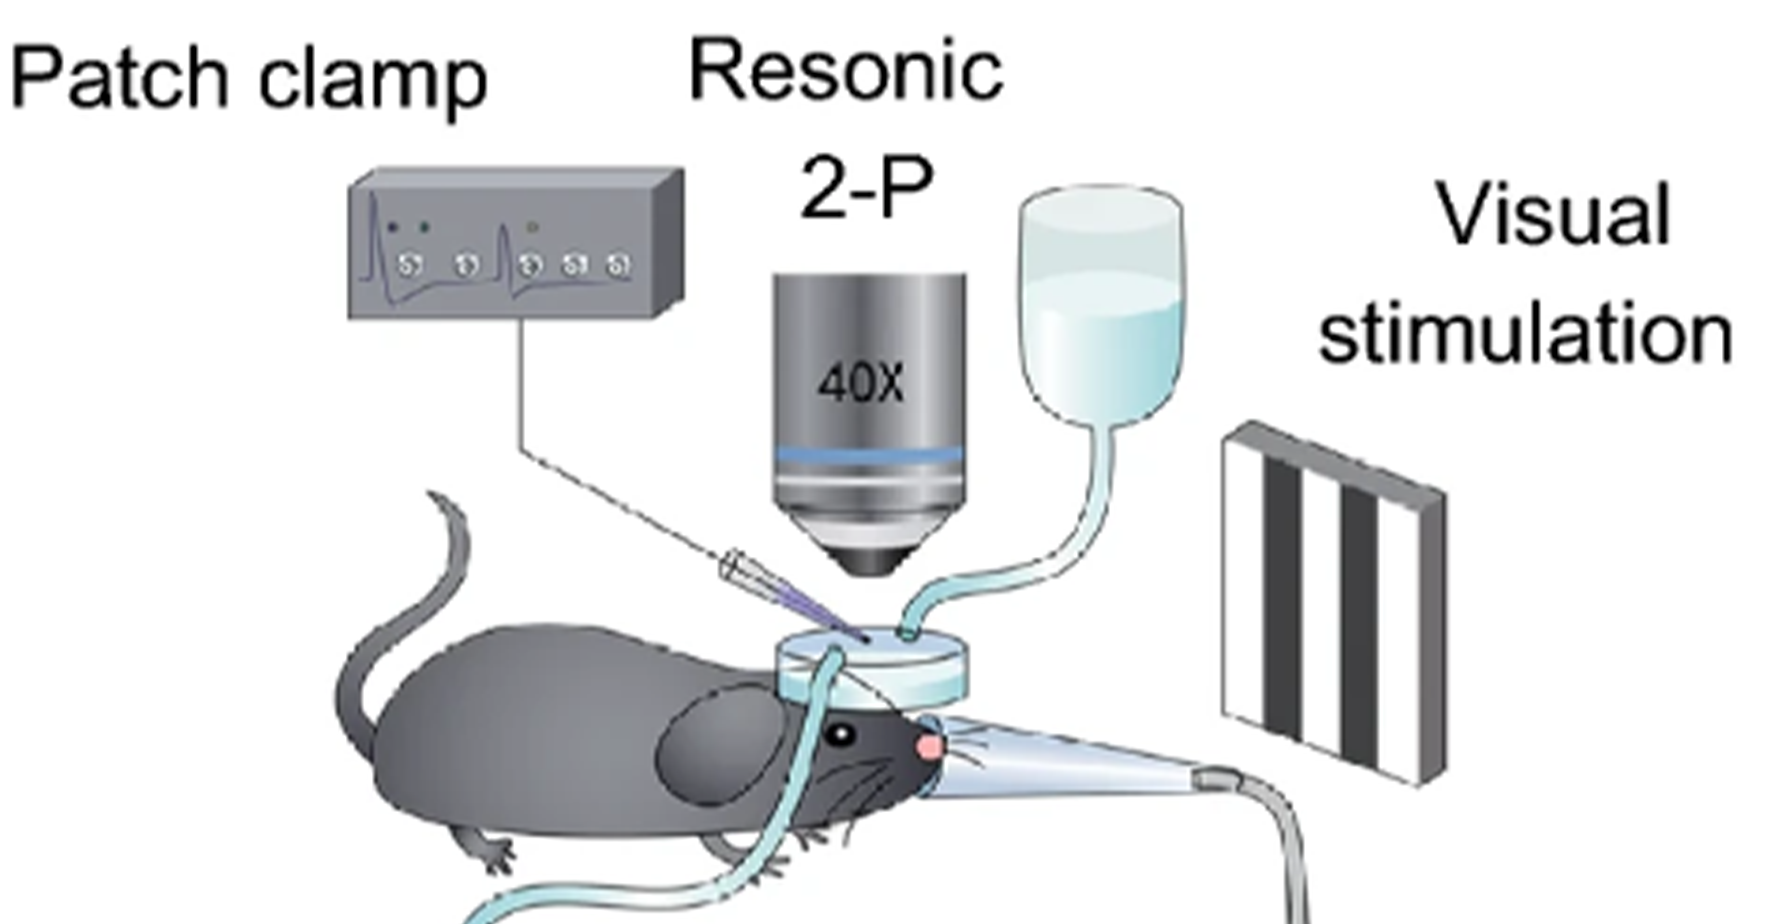 Integrative Analysis of in Vivo Recording with Single-Cell RNA-seq Data Reveals Molecular Properties of Light-Sensitive Neurons in Mouse V1